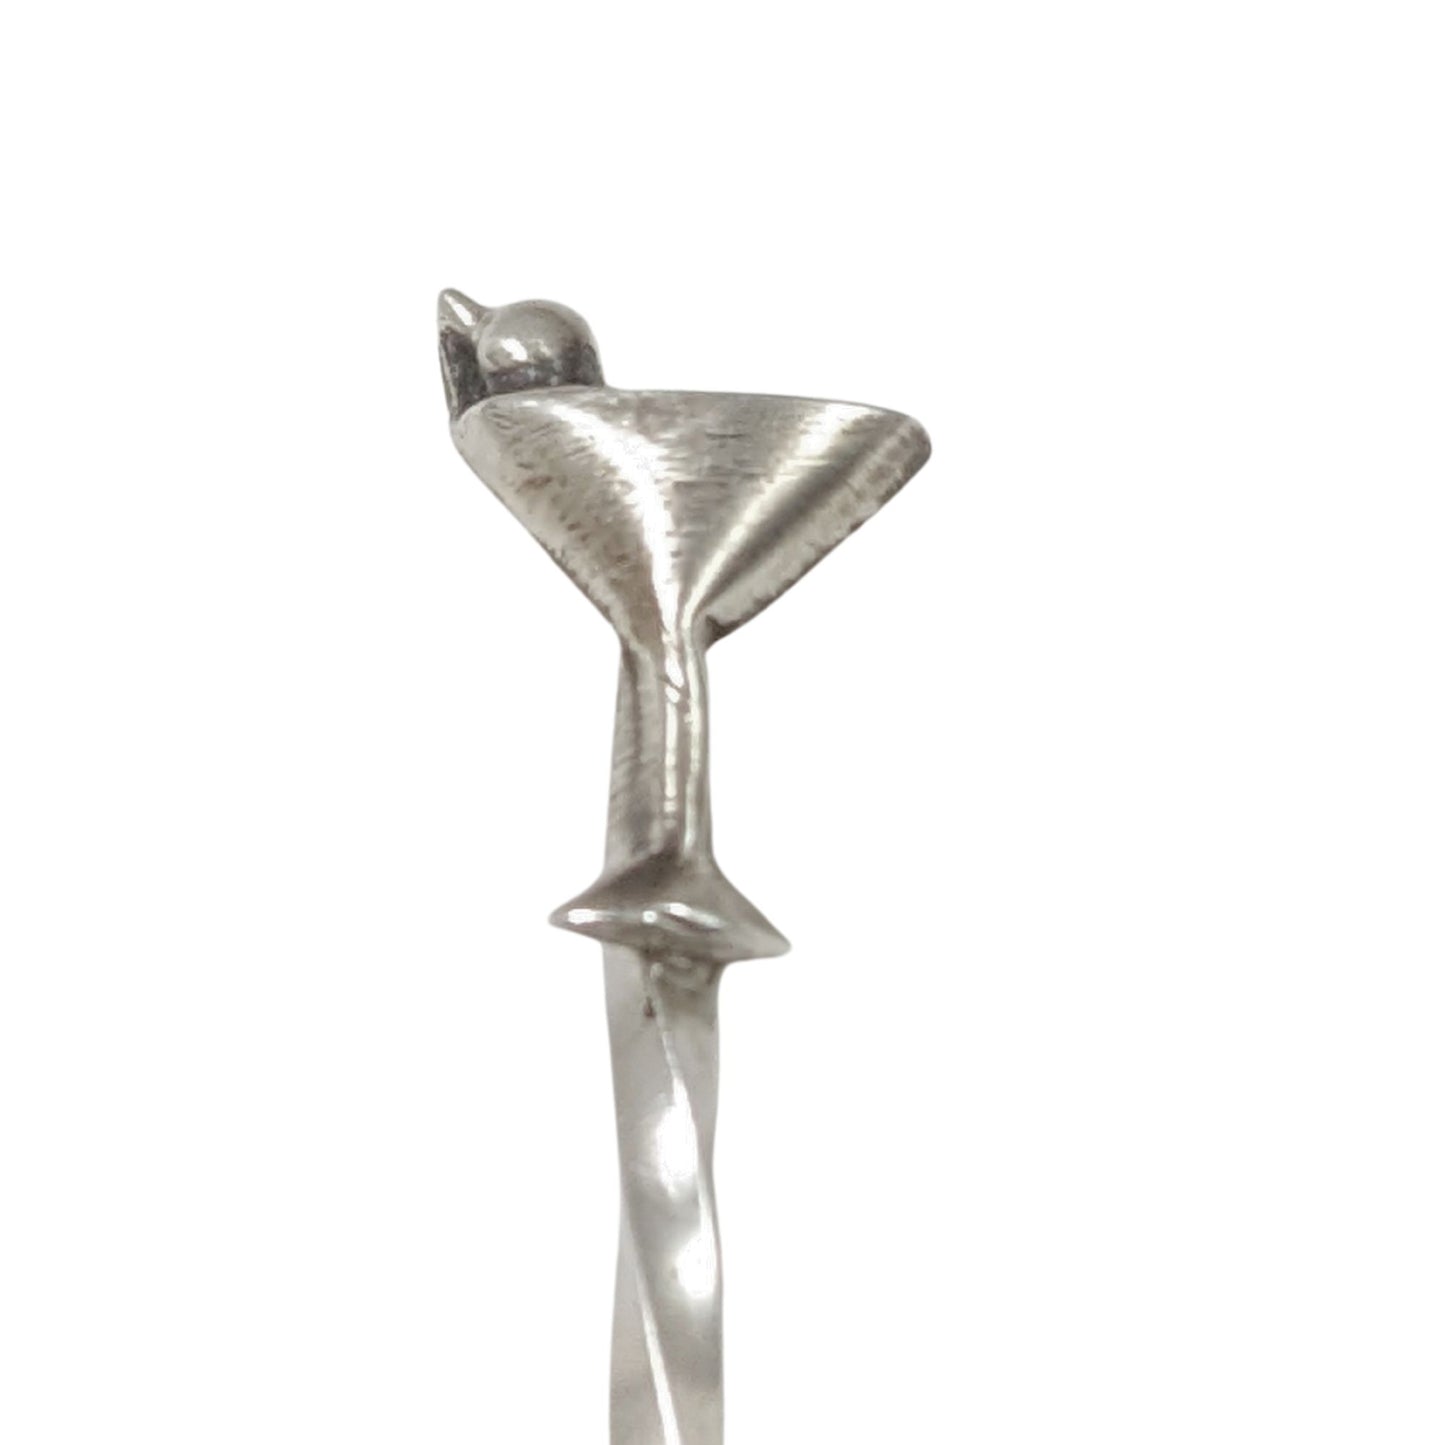 Sterling silver cocktail pick. At the top is a silver martini glass with a single olive.